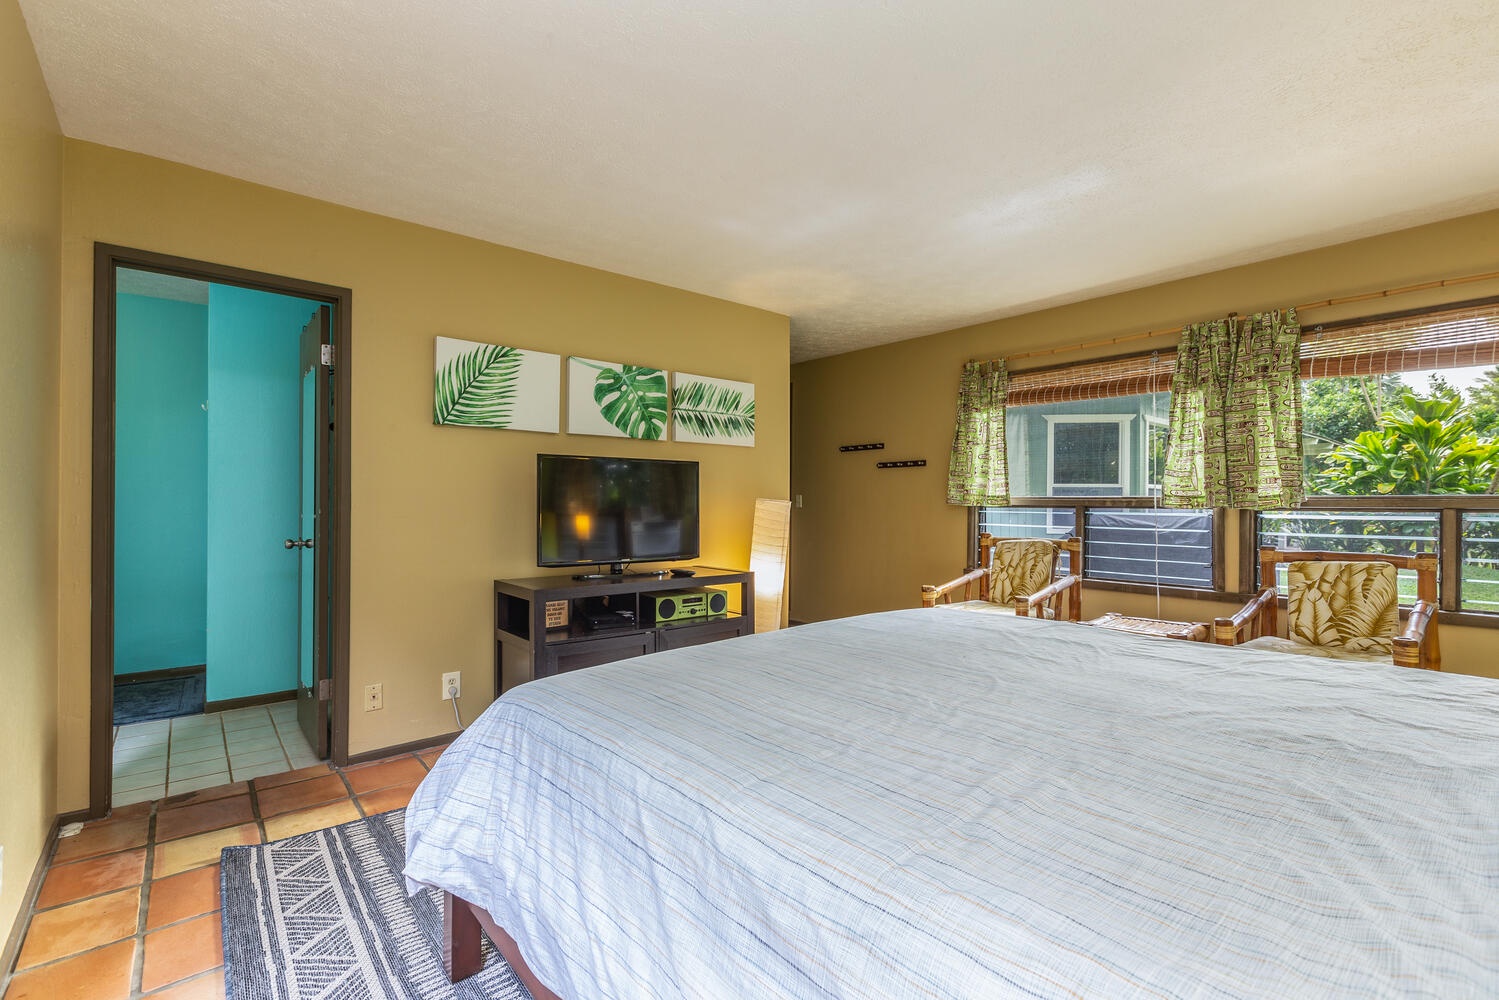 Princeville Vacation Rentals, Ailana Hale - Primary bedroom with king bed